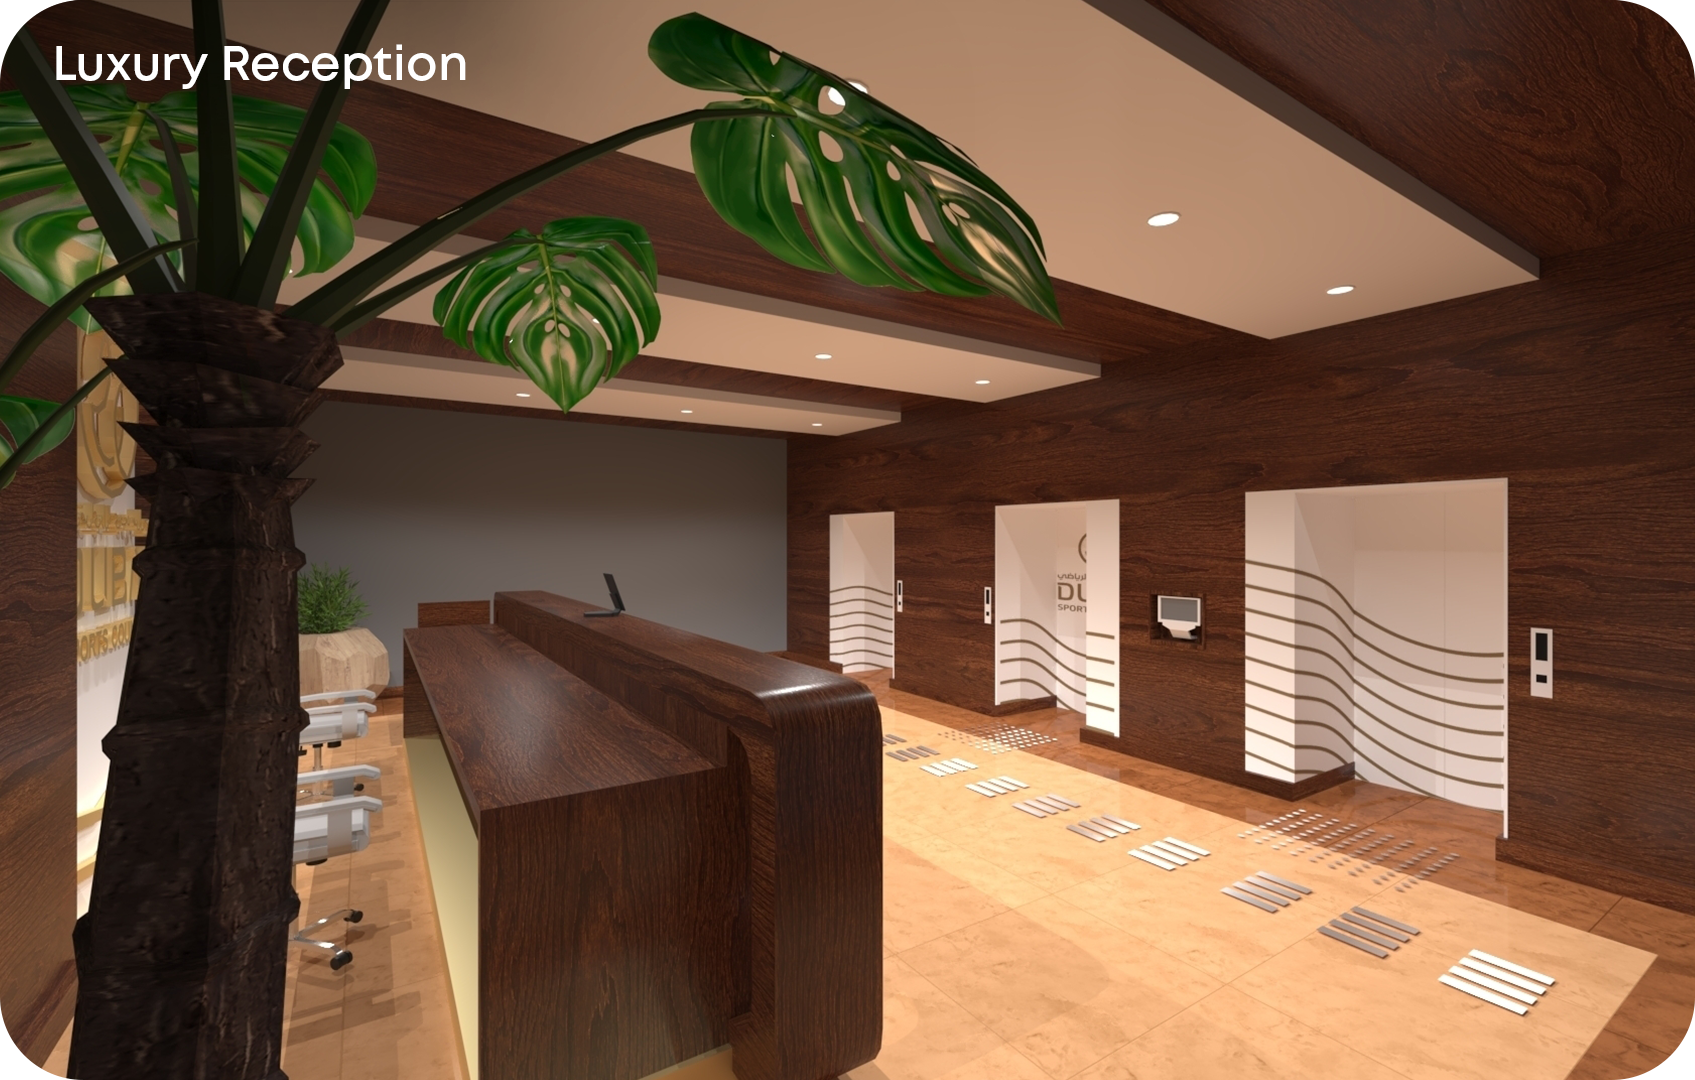 3934-luxury-reception-1.png